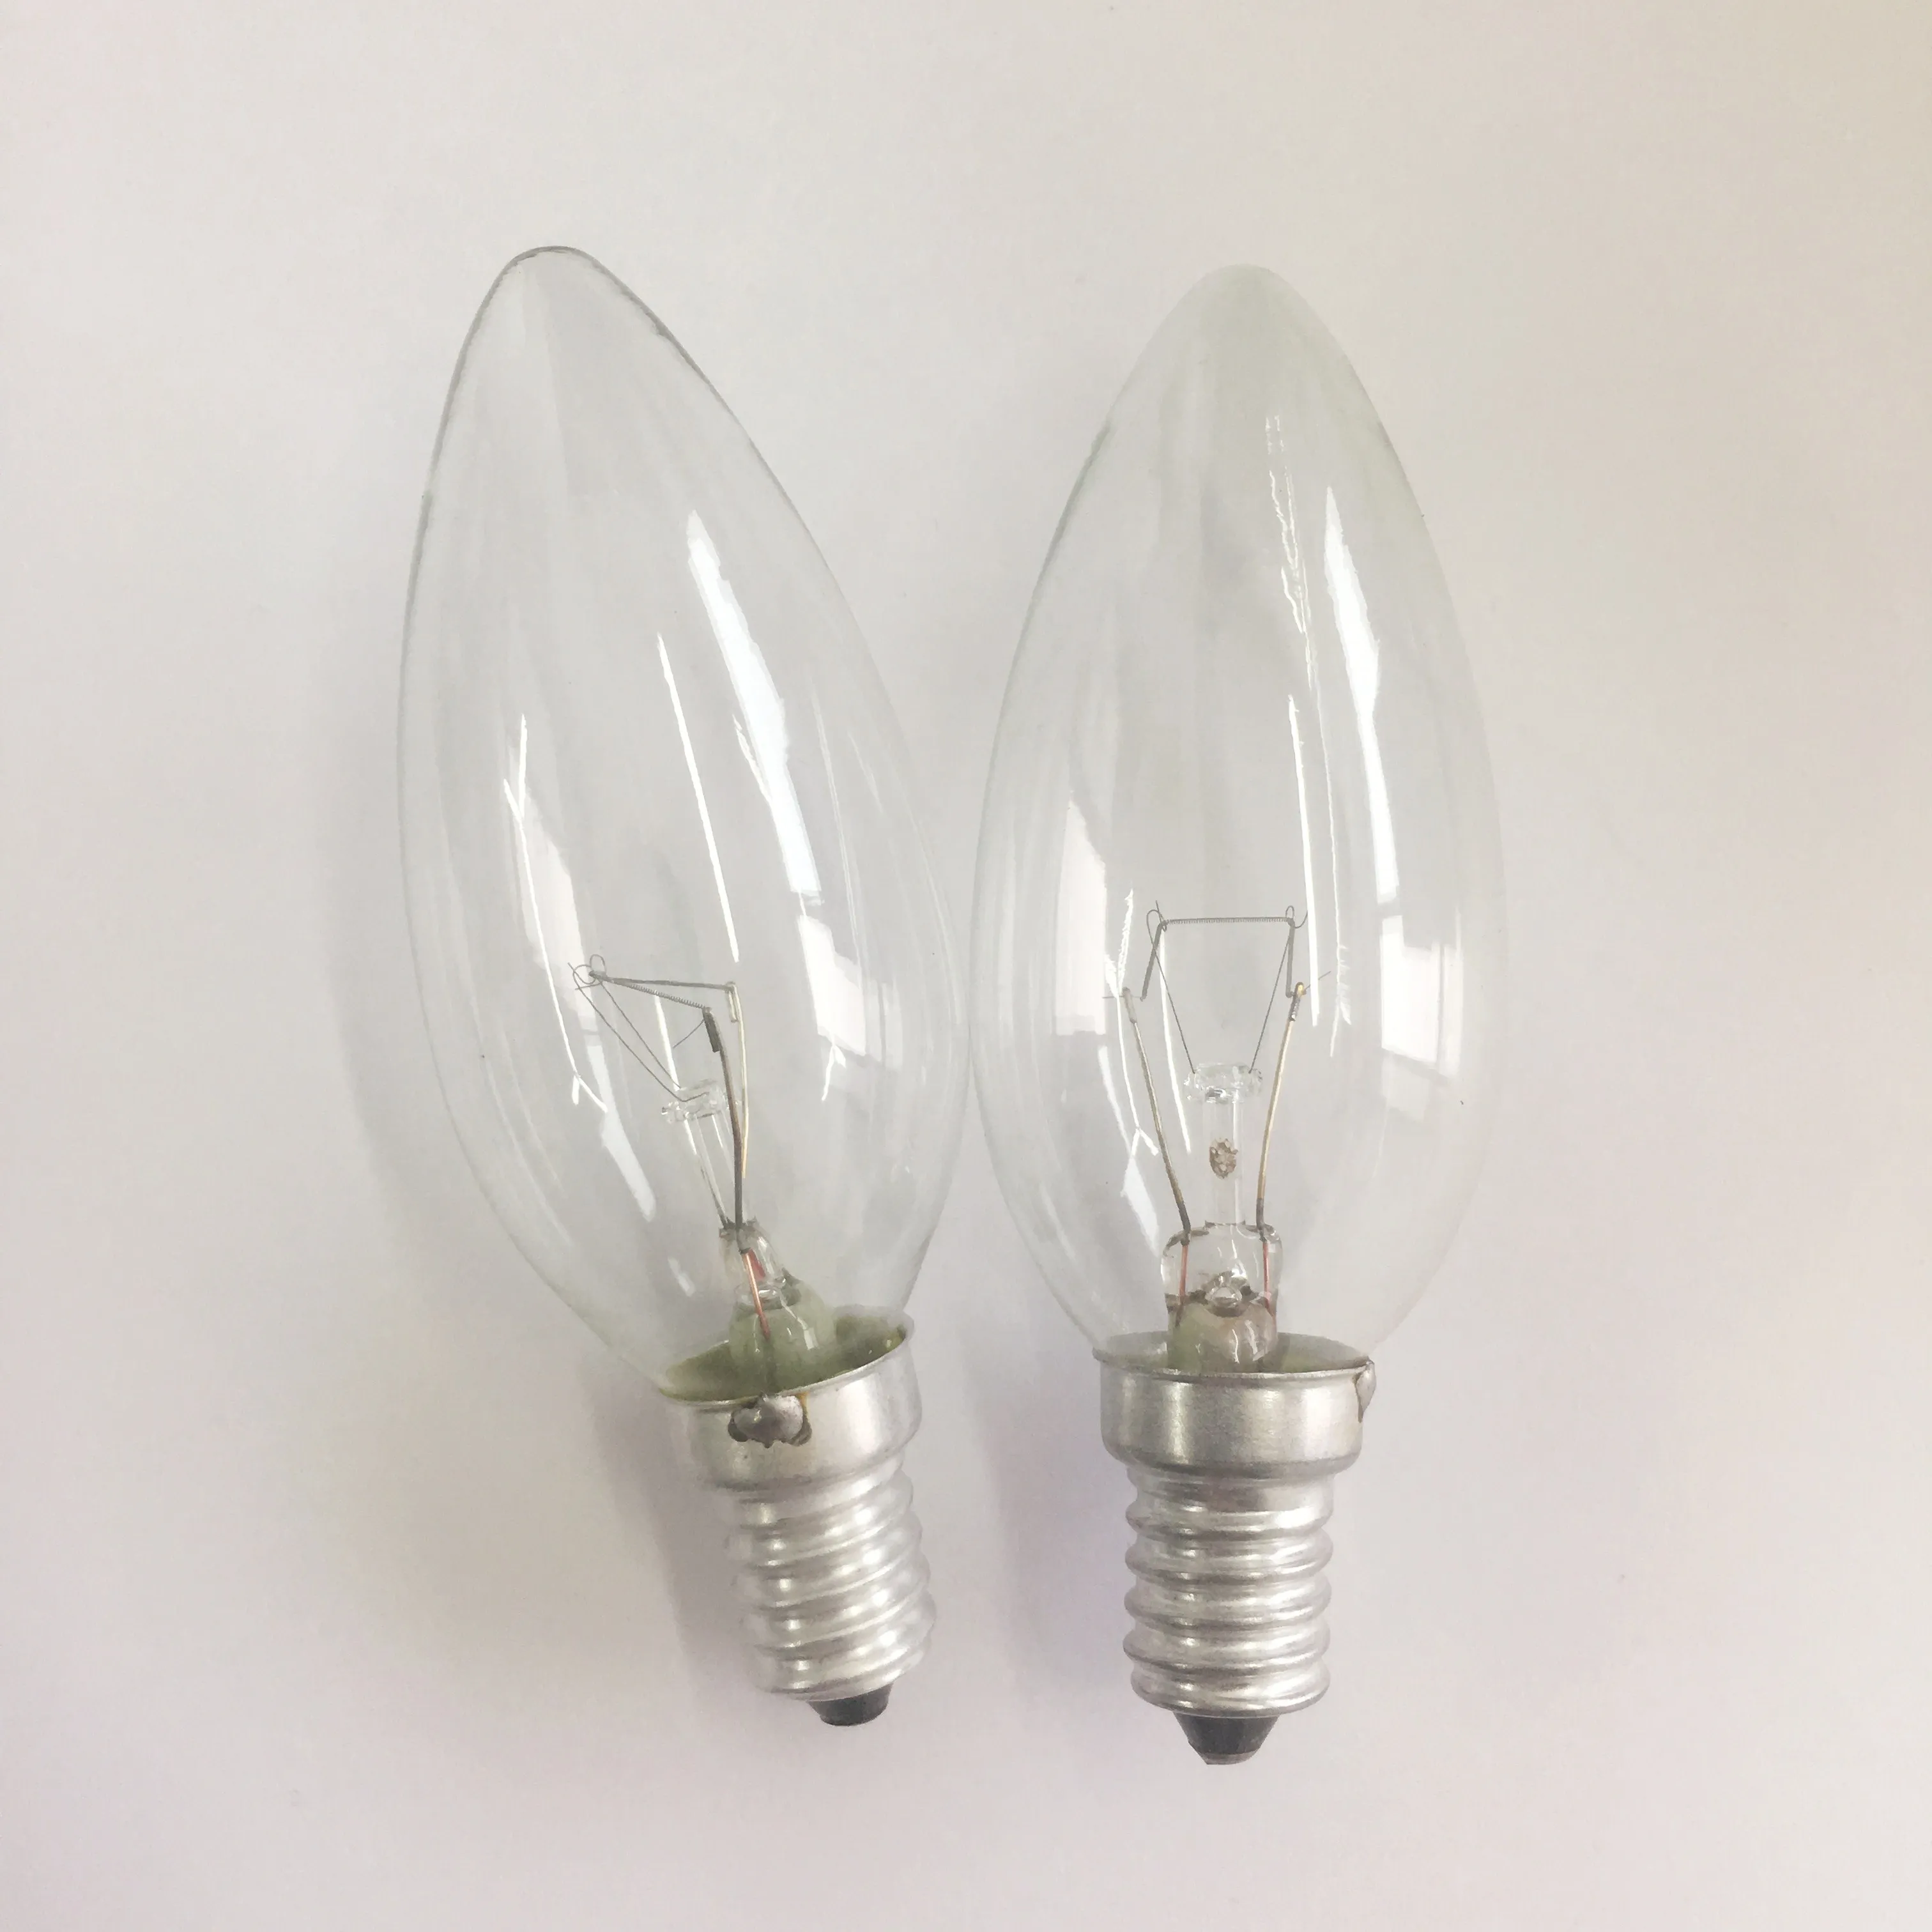 Professional e27 e14 c35 220v incandescent candle light clear bulb lamp 40w 60w with ce approved